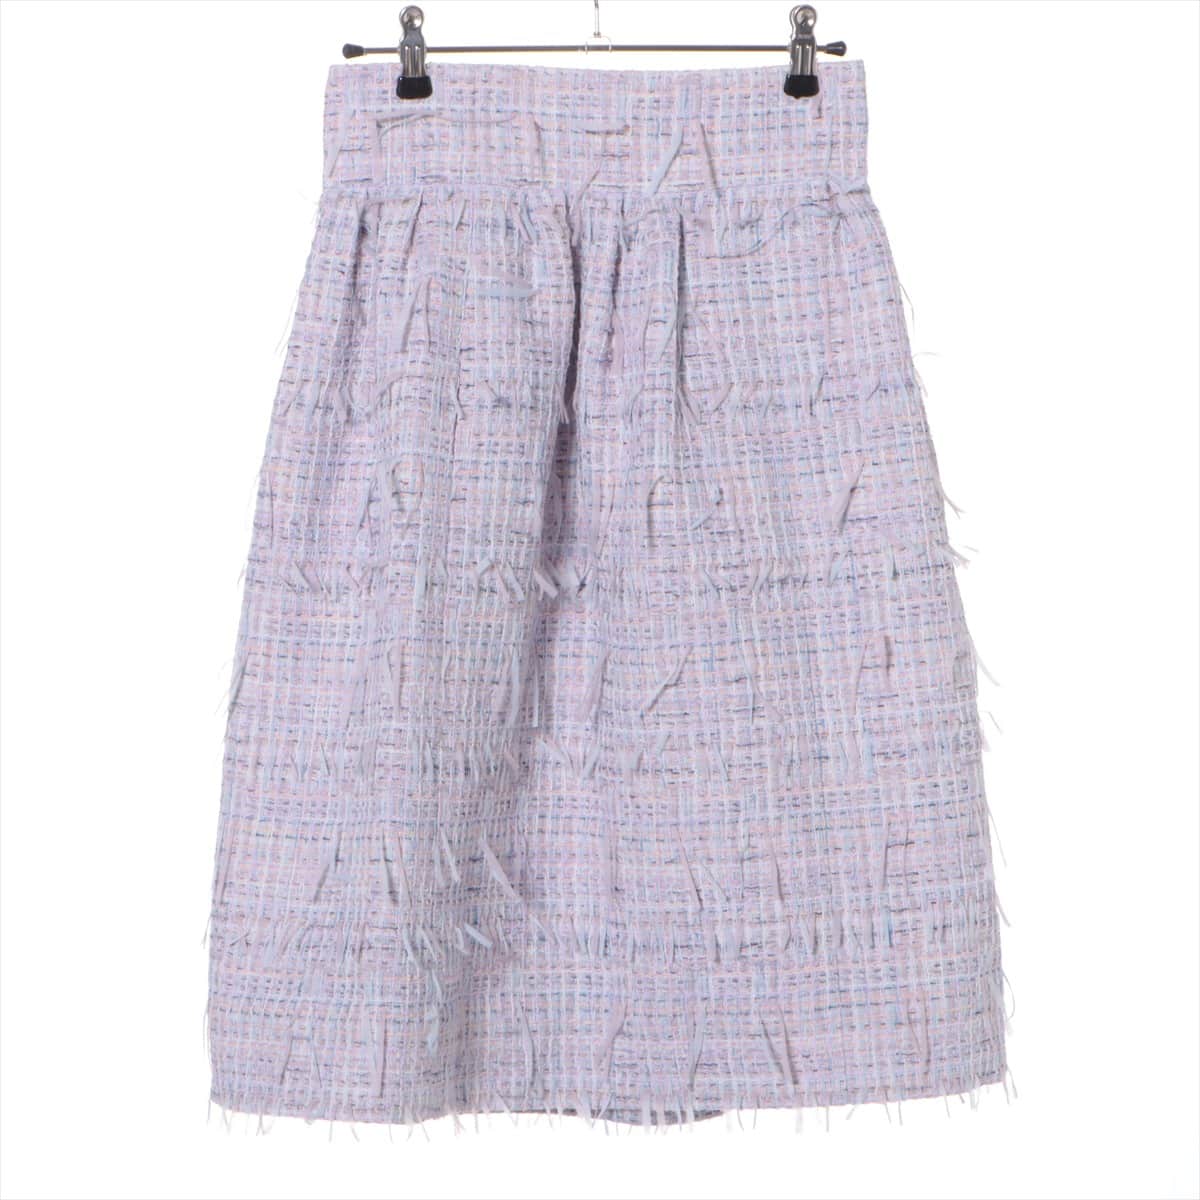 Chanel P58 Cotton & polyester Skirt 34 Ladies' Purple  Coco Button